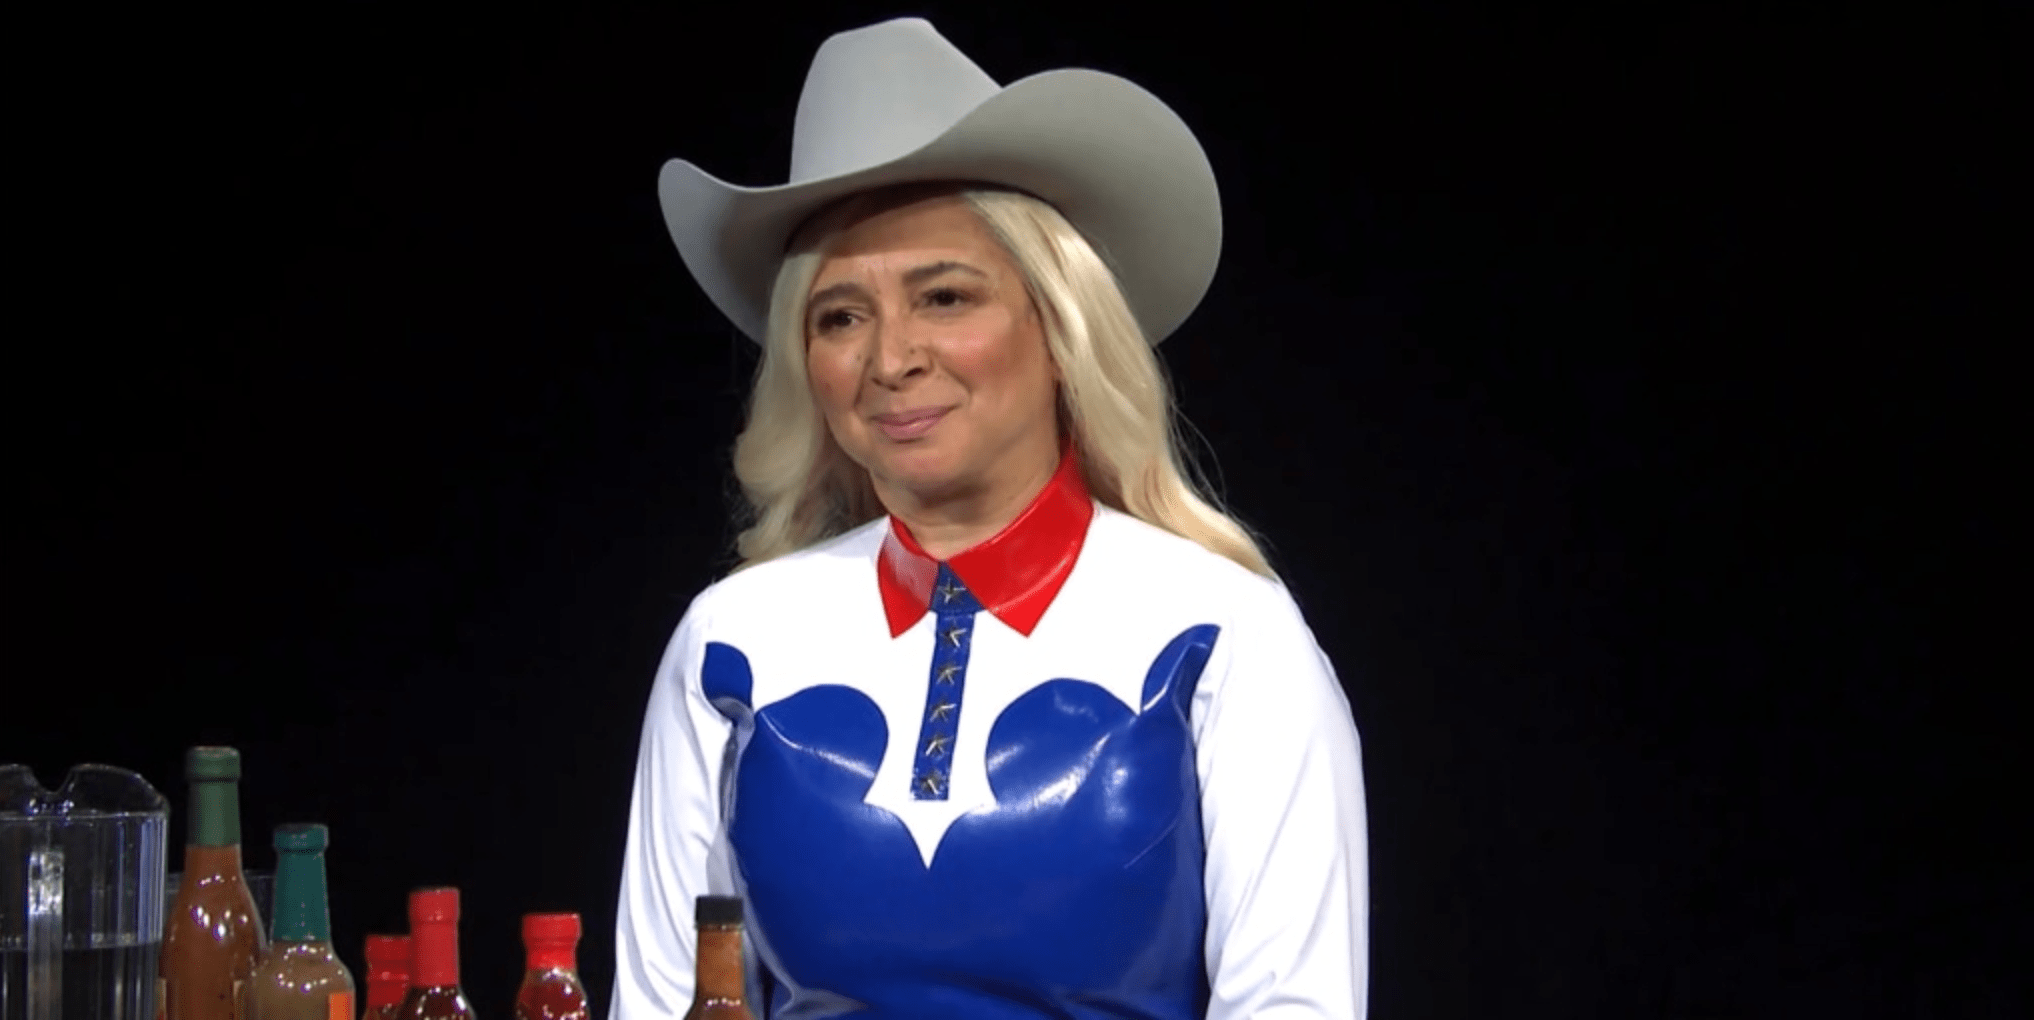 Maya Rudolph channels a ‘Cowboy Carter'-inspired Beyoncé on ‘SNL'
in ‘Hot Ones' sketch